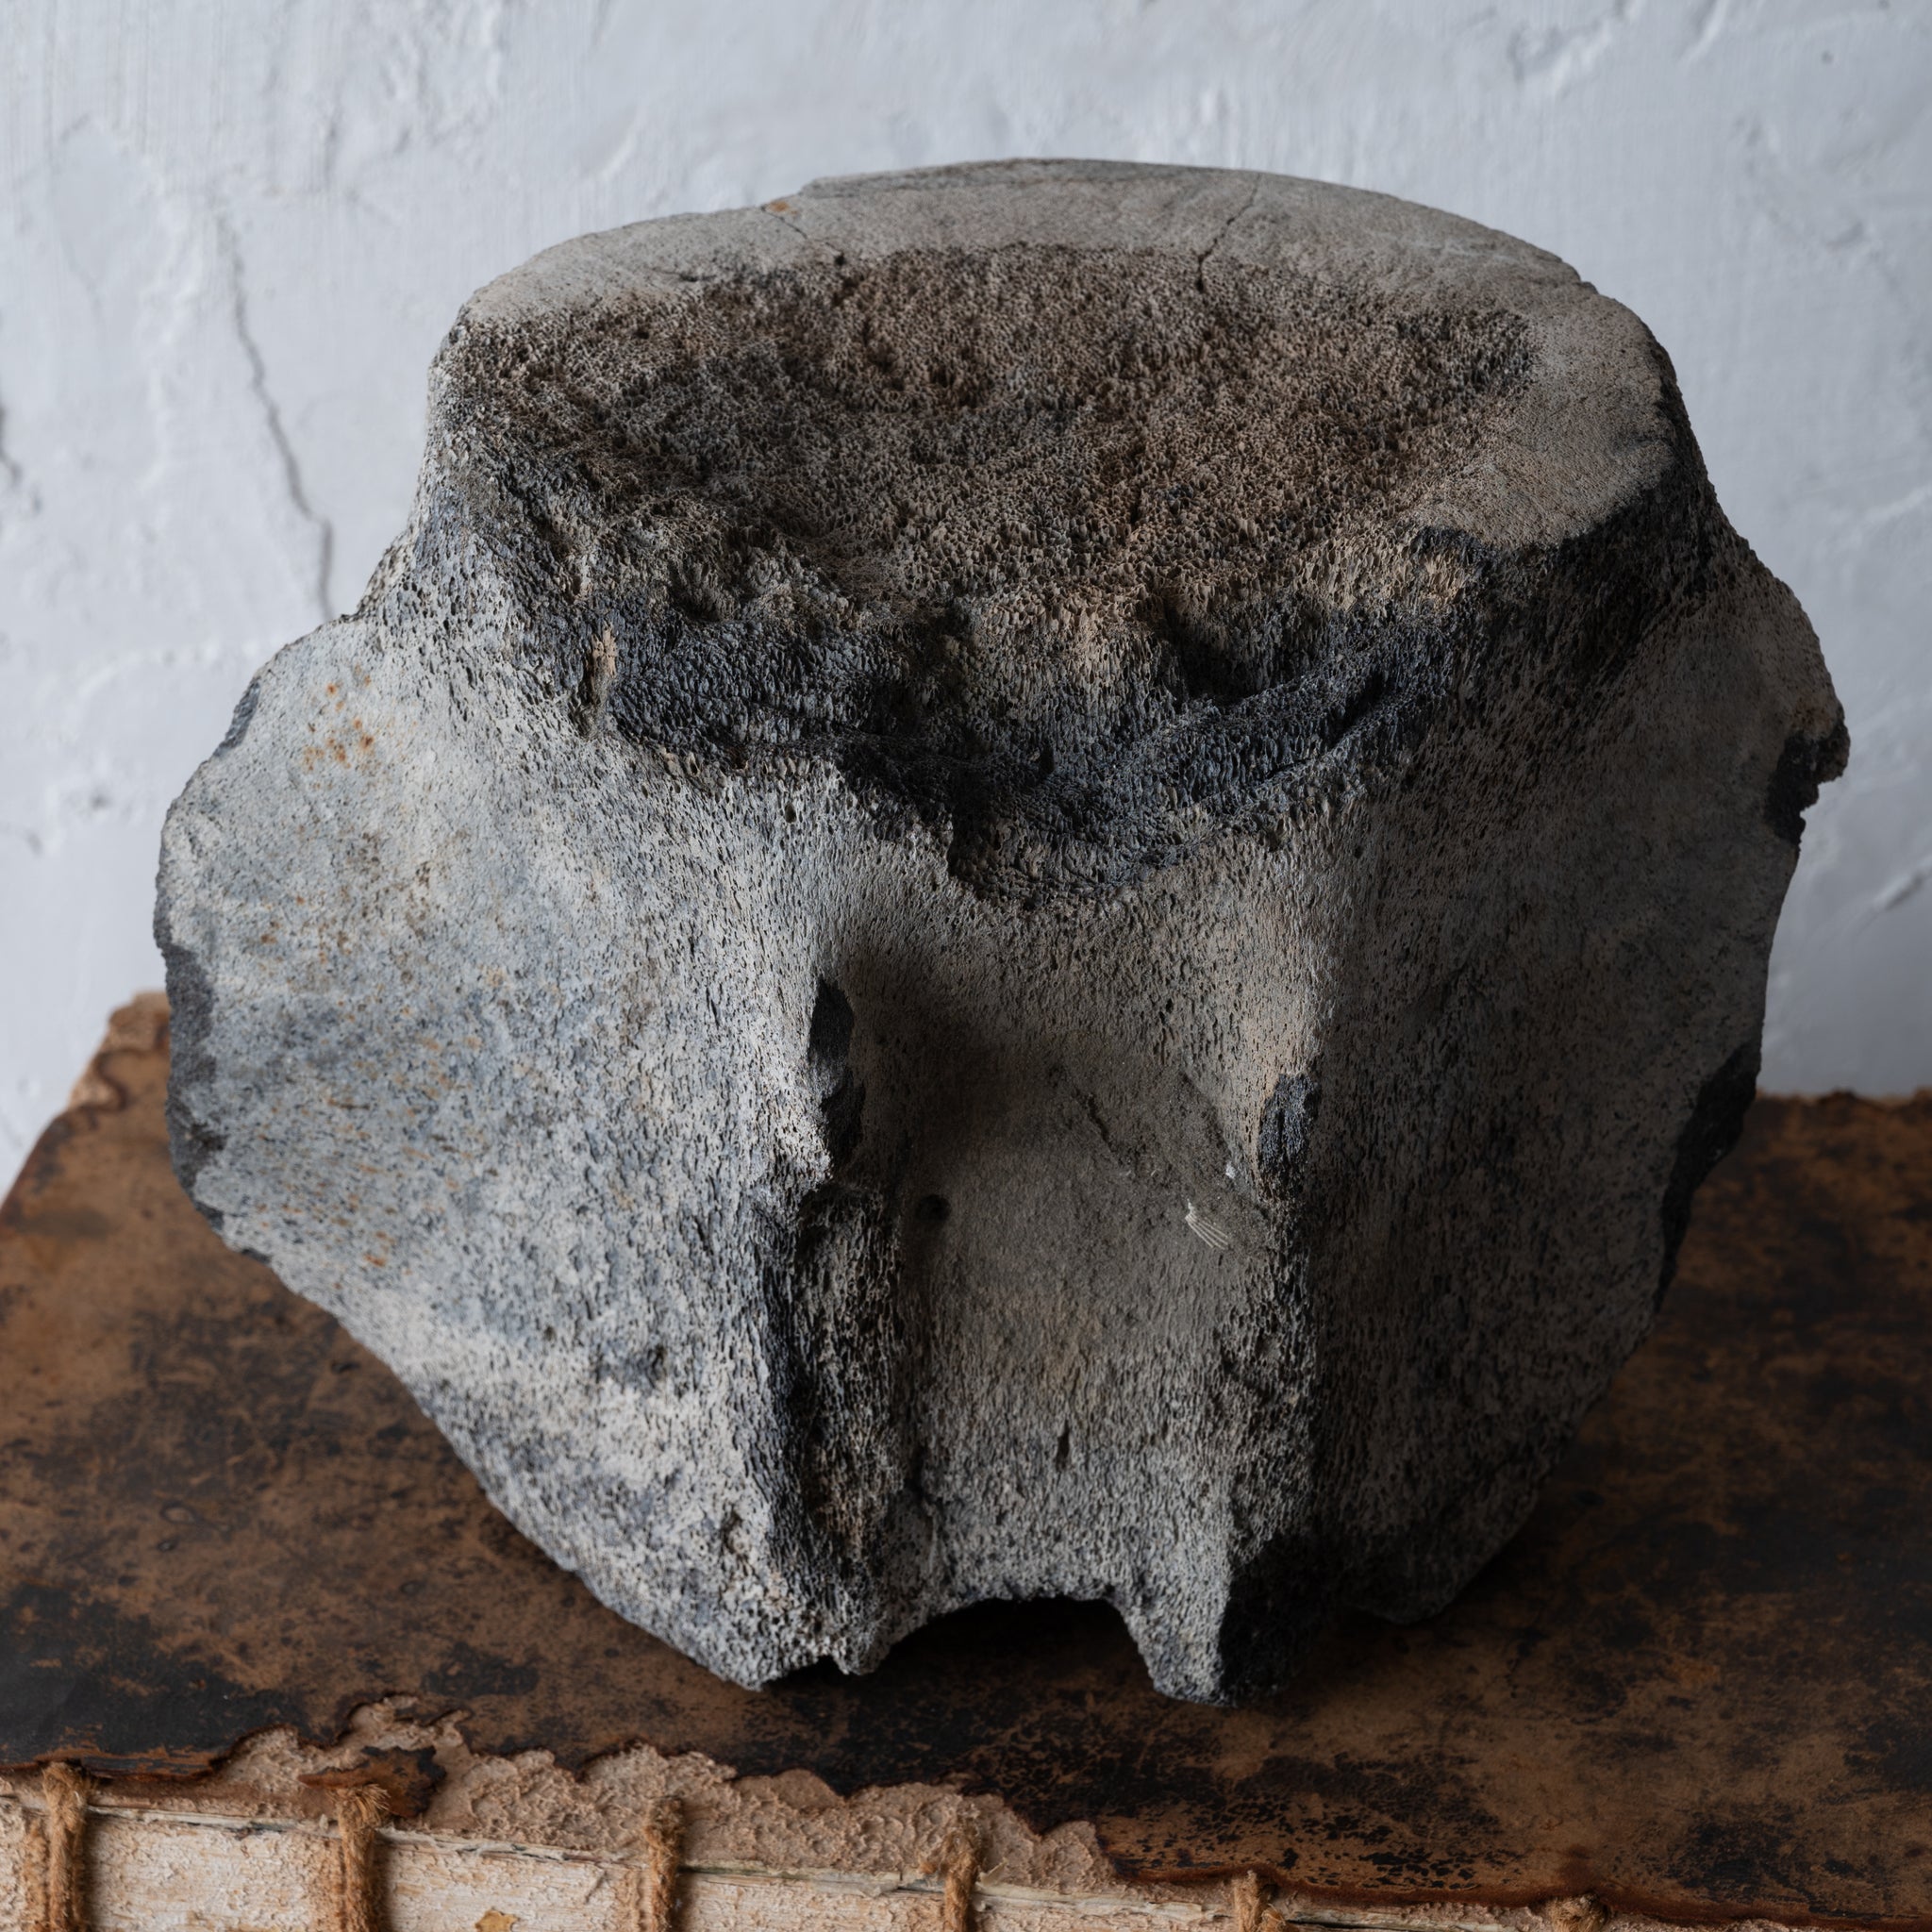 A Fossilized Whale Vertebrae